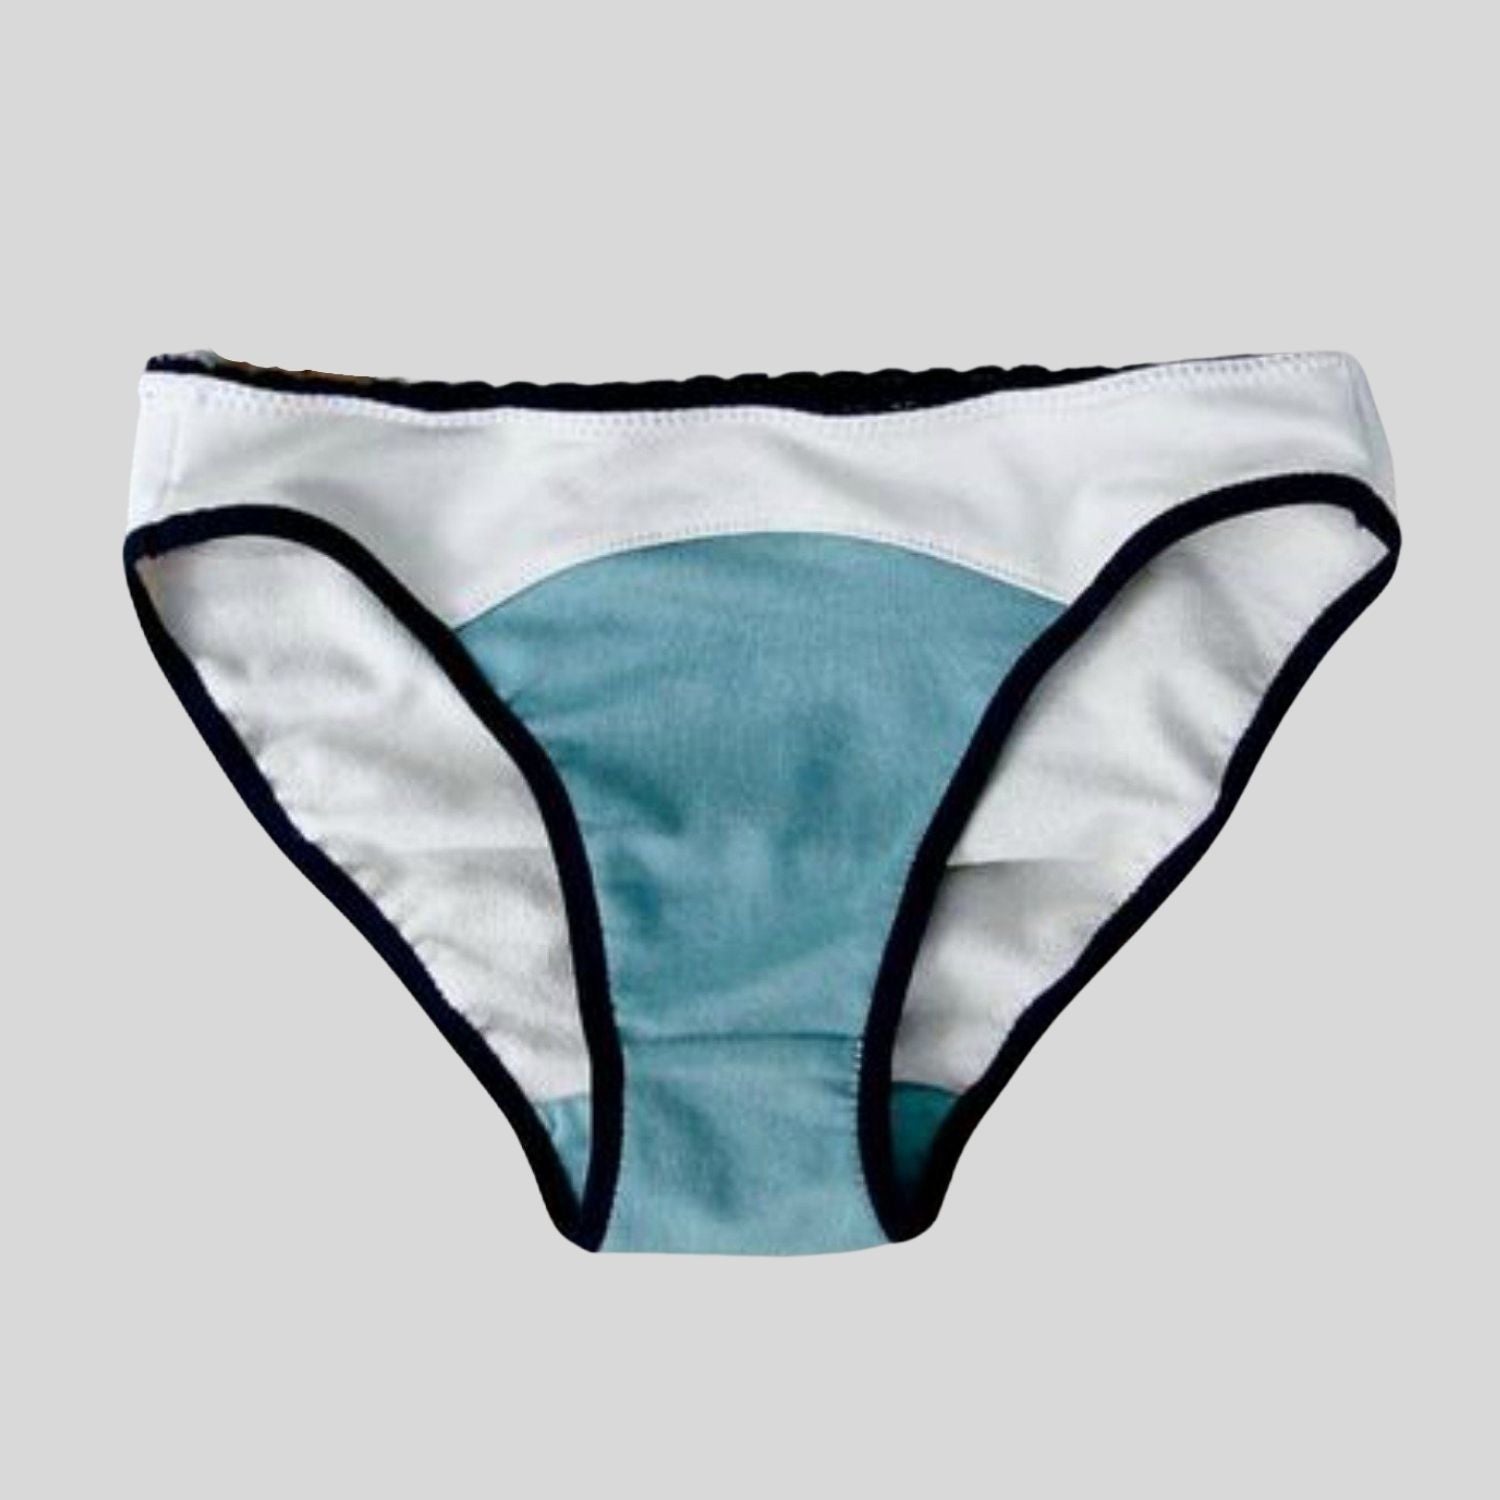 Made in Canada women's panties | Shop Organic cotton underwear for wome